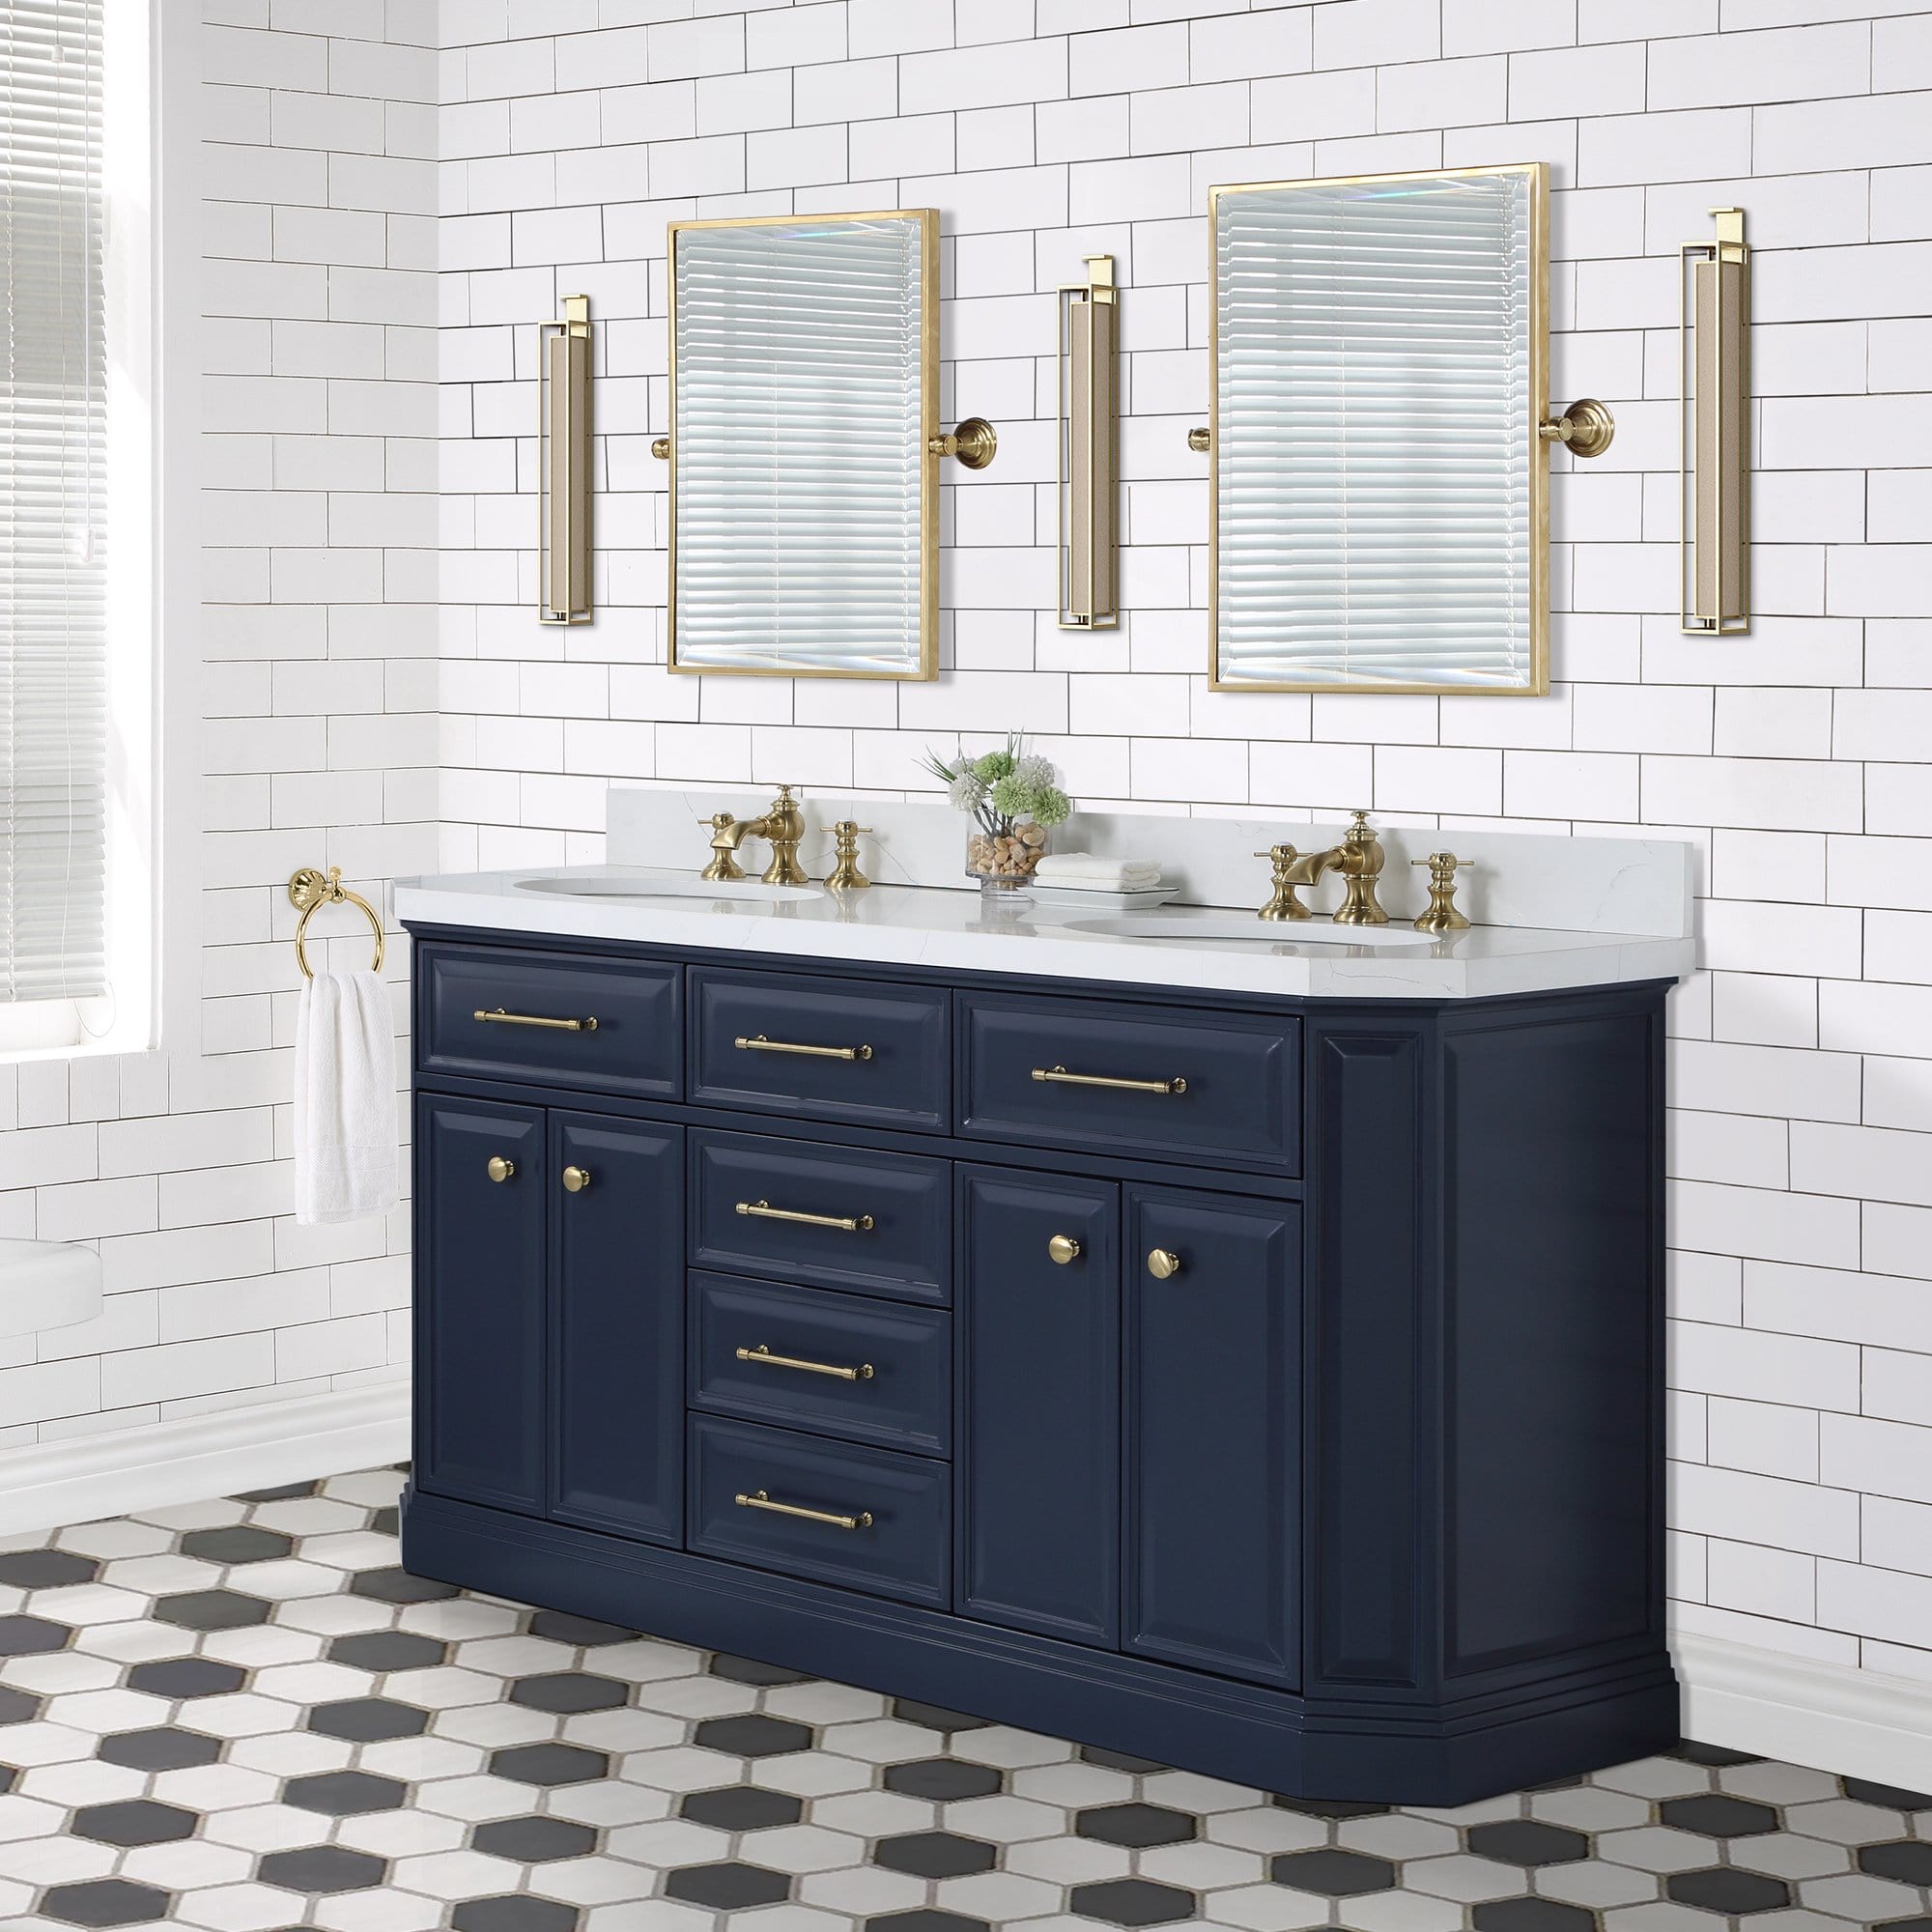 Water Creation Palace 60 In. Double Sink White Quartz Countertop Vanity in Monarch Blue with Waterfall Faucets and Mirrors - Molaix732030765023Bathroom vanityPA60QZ06MB-E18FX1306